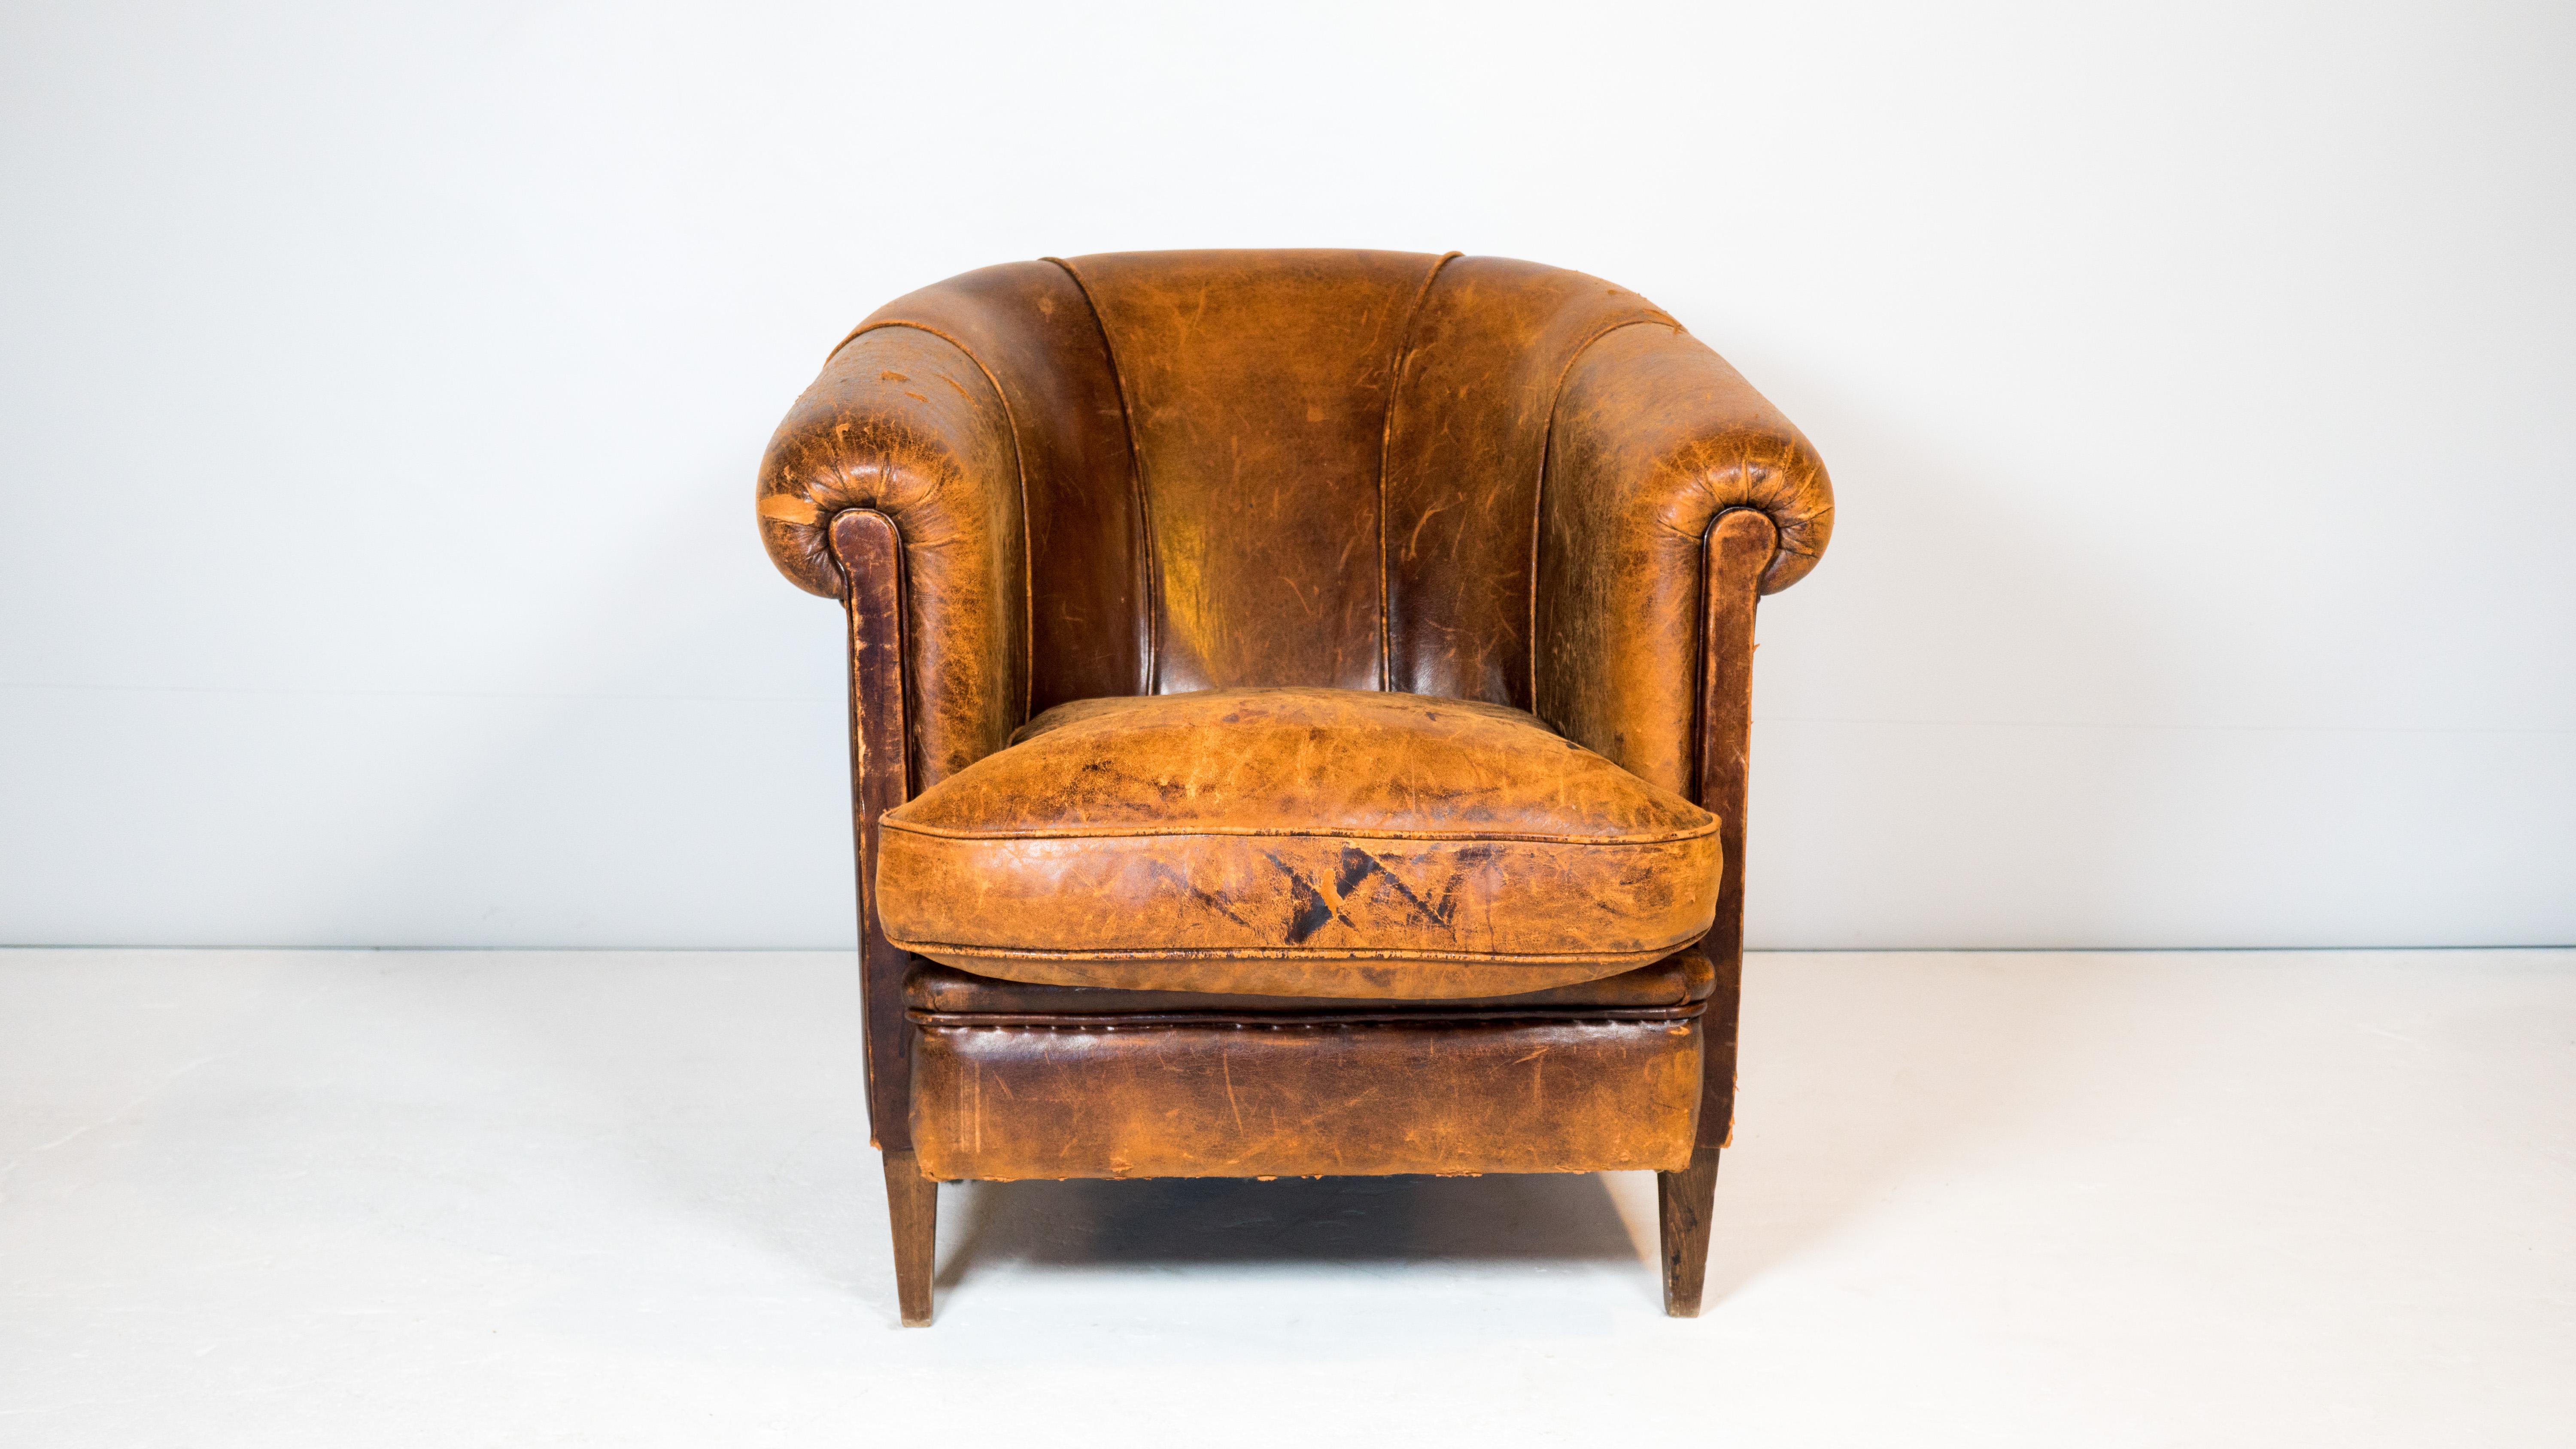 Vintage Art Deco leather club chair, circa 1970s. Beautifully distressed cigar brown leather with aged patina. Rounded armrests that slope around the back for a inviting and lounging feel. Nice stitching details and piping trim. Supported by tapered